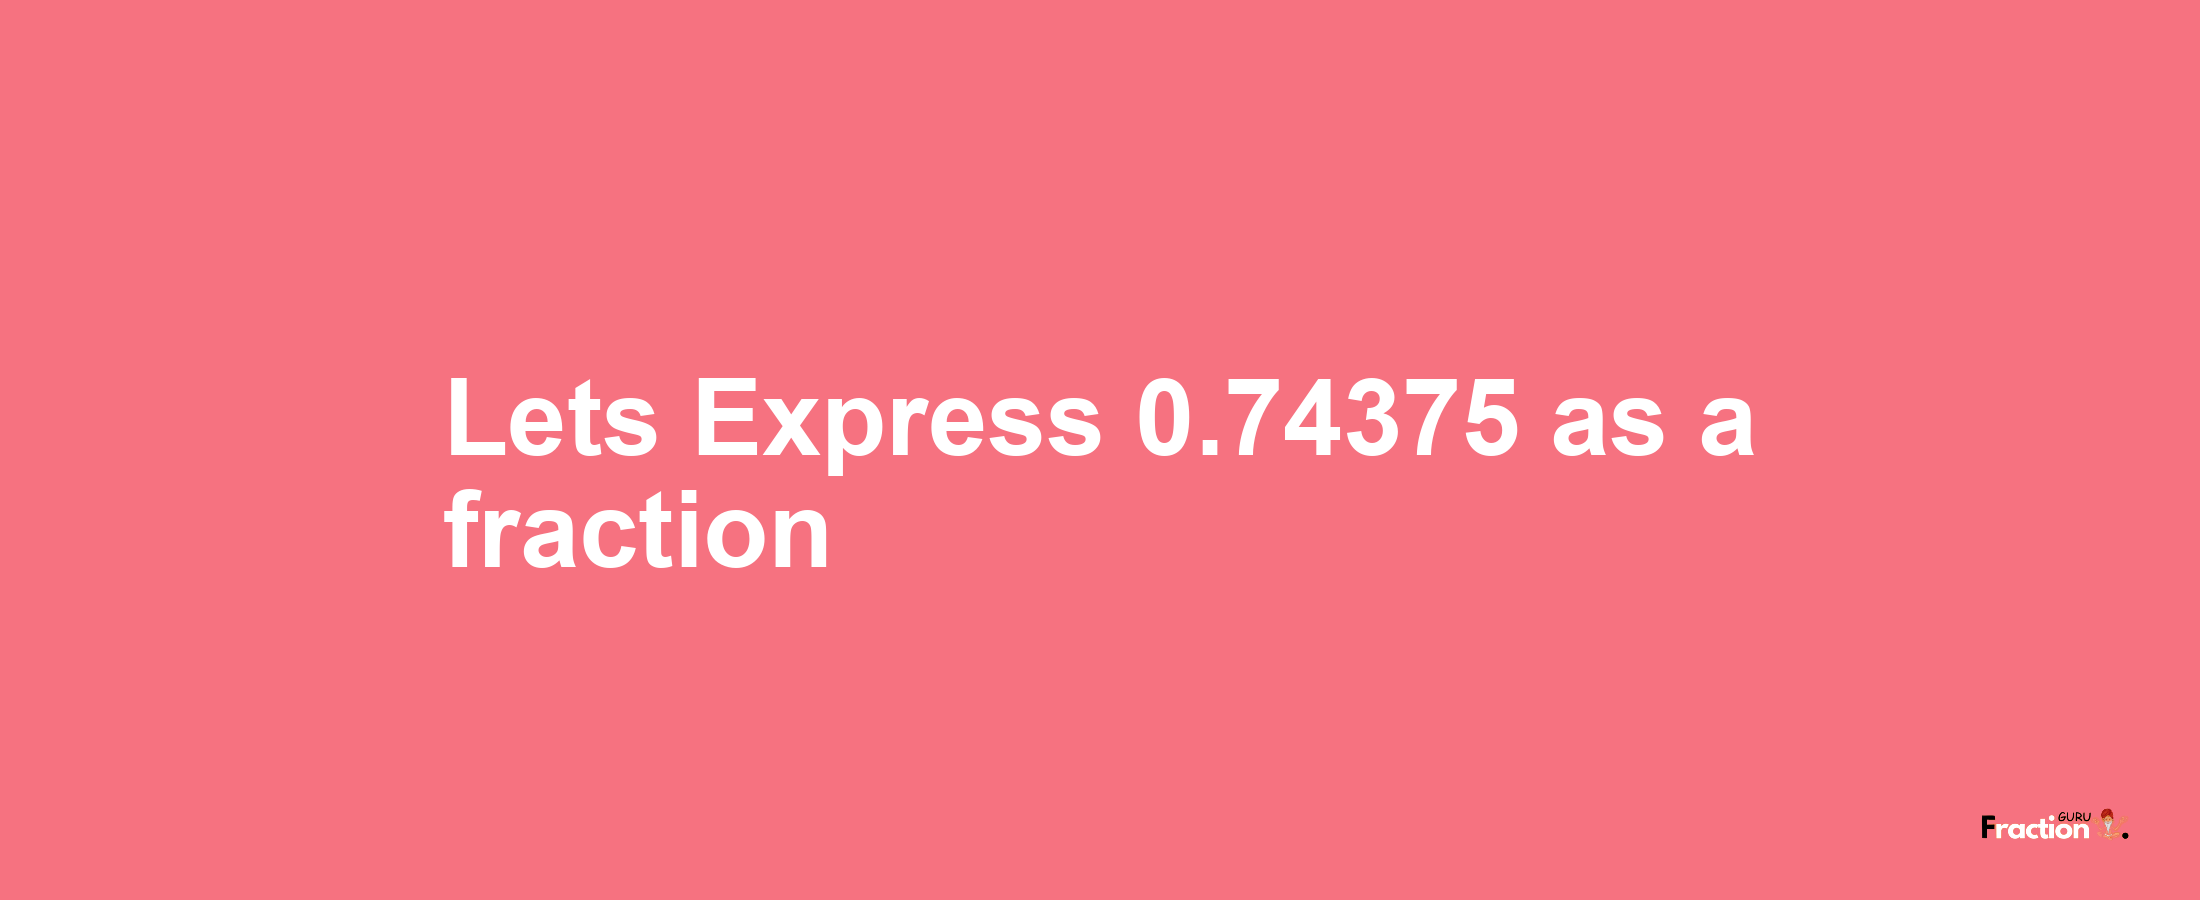 Lets Express 0.74375 as afraction